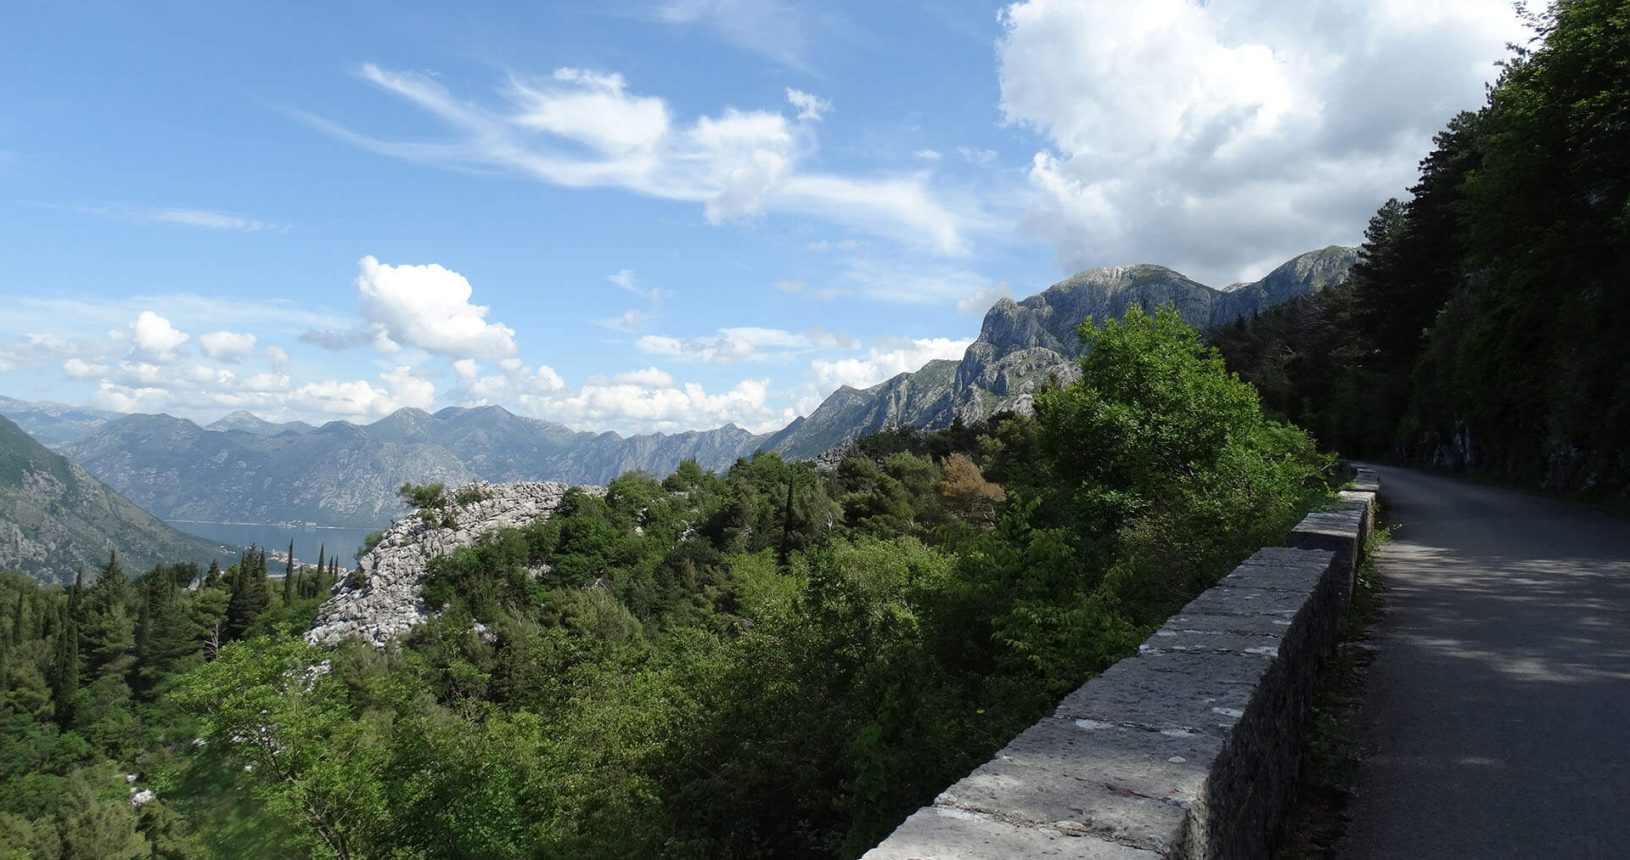 From Bay of Kotor to Lovcen National Park